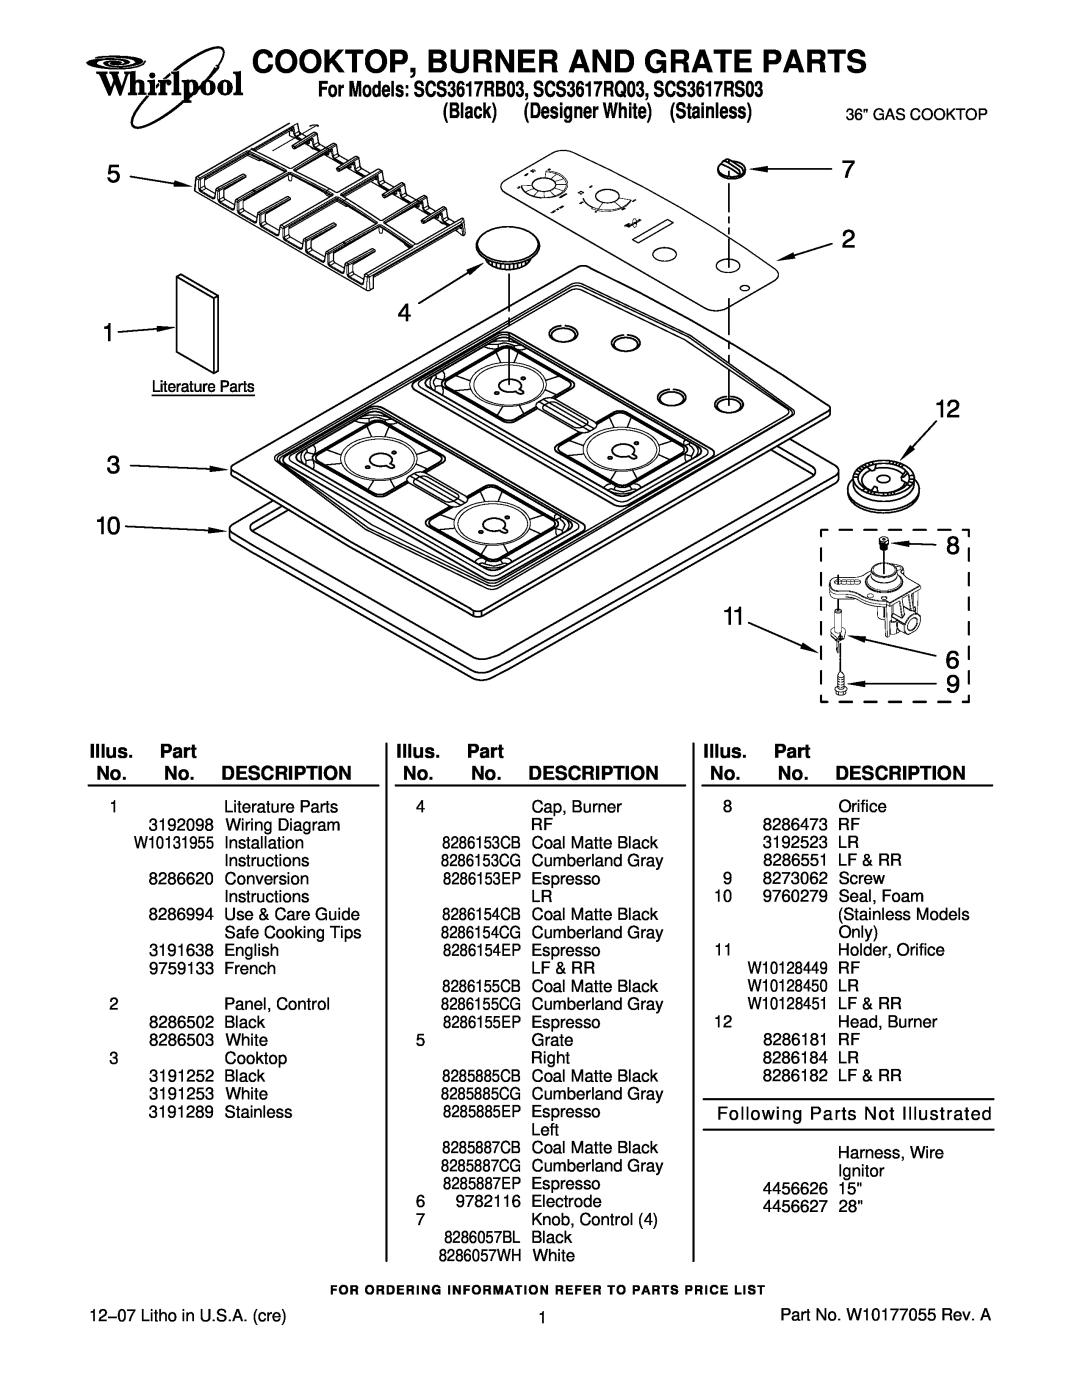 Whirlpool SCS3617RS03, SCS3617RB03 installation instructions Cooktop, Burner And Grate Parts, Illus, Description 